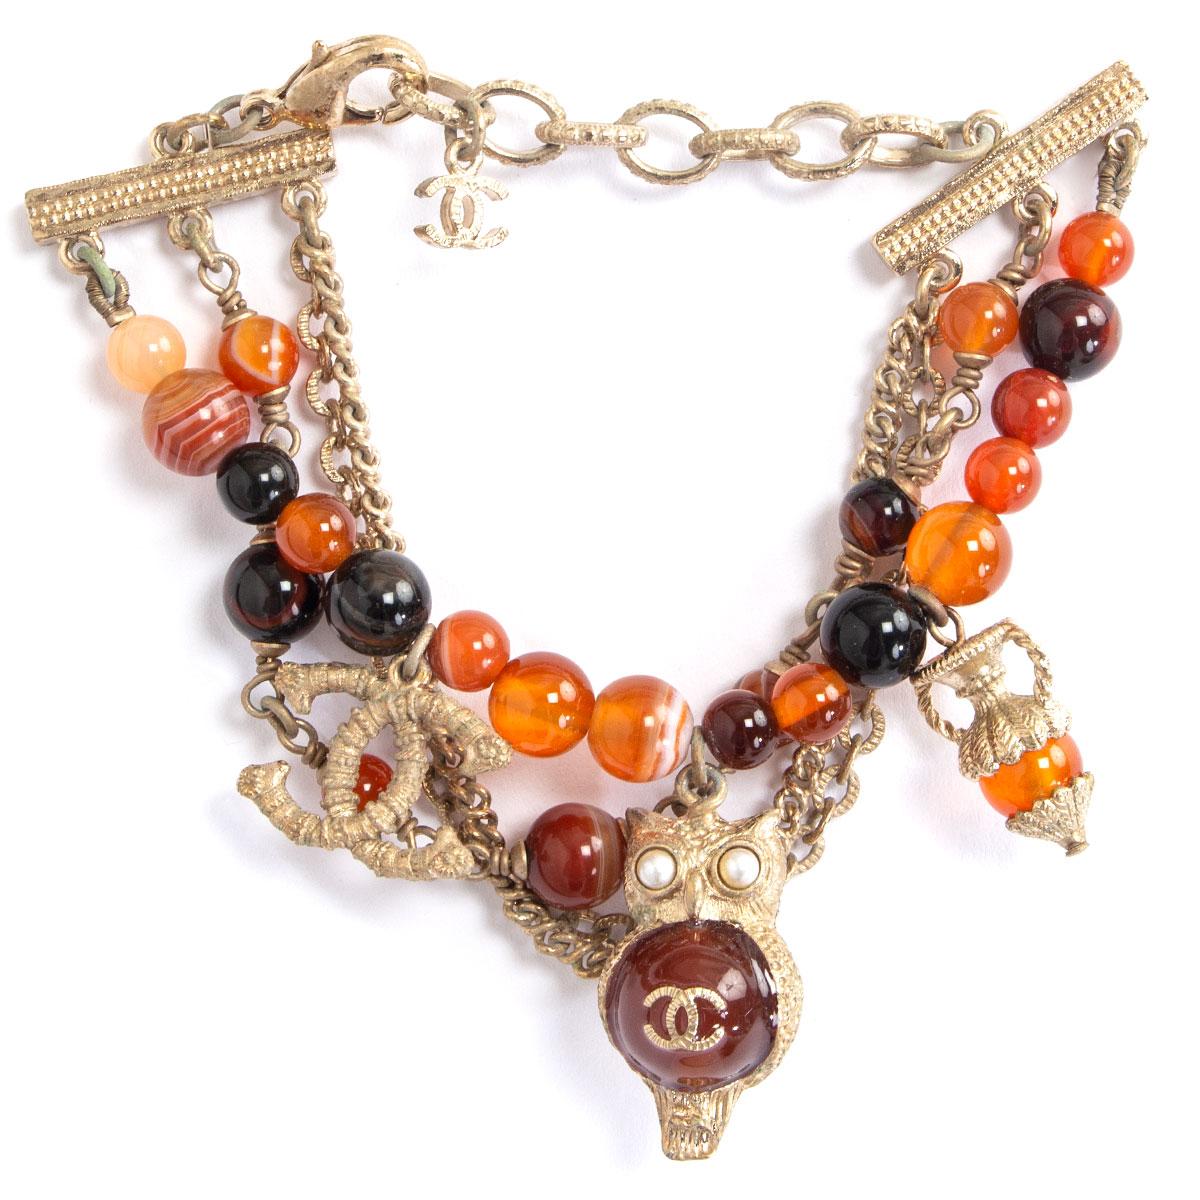 authentic Chanel Paris - Greece bracelet in rust, orange, burgundy and honey colored faux stones embellished with CC logo and an owl in light-gold metal. Has been worn and is in excellent condition. 

Width 7cm (2.7in)
Length 22cm (8.6in)
Hardware